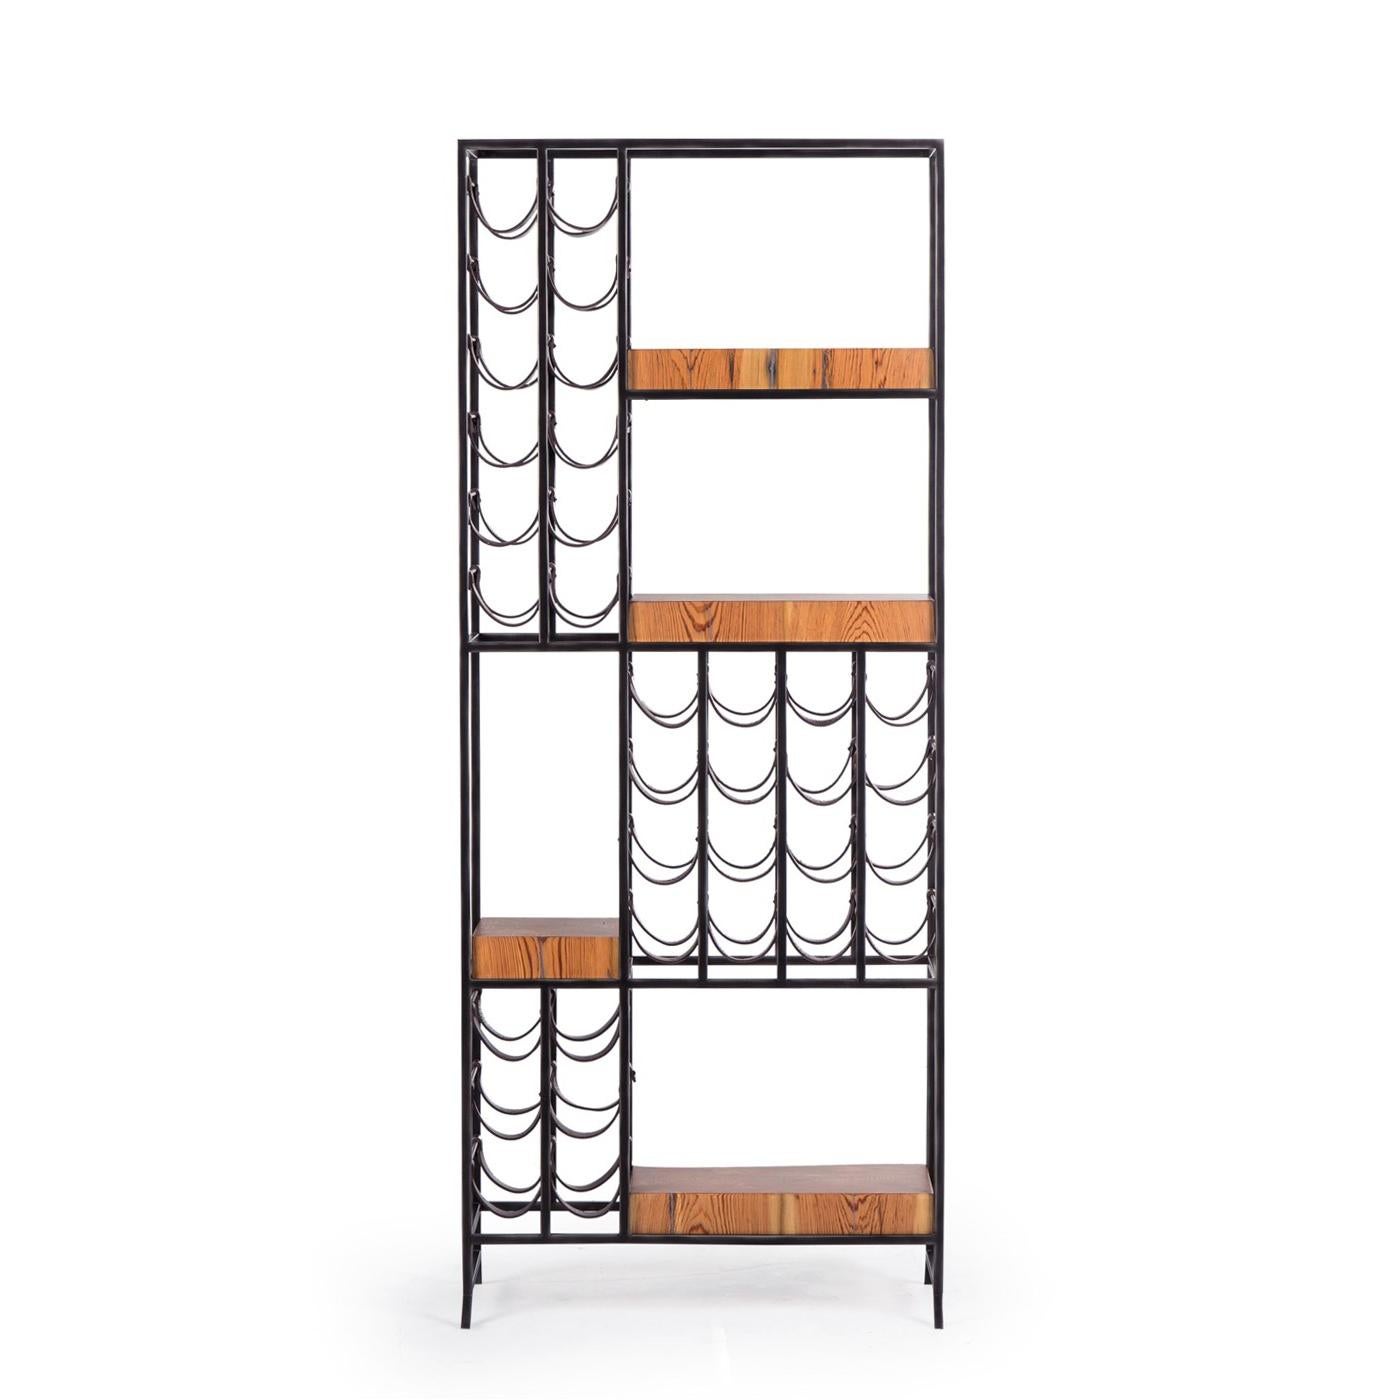 Rack 36 bottles with forged iron frame
with 4 shelves in solid pinewood and with
36 leather style bottle rack. Tipping restraint.